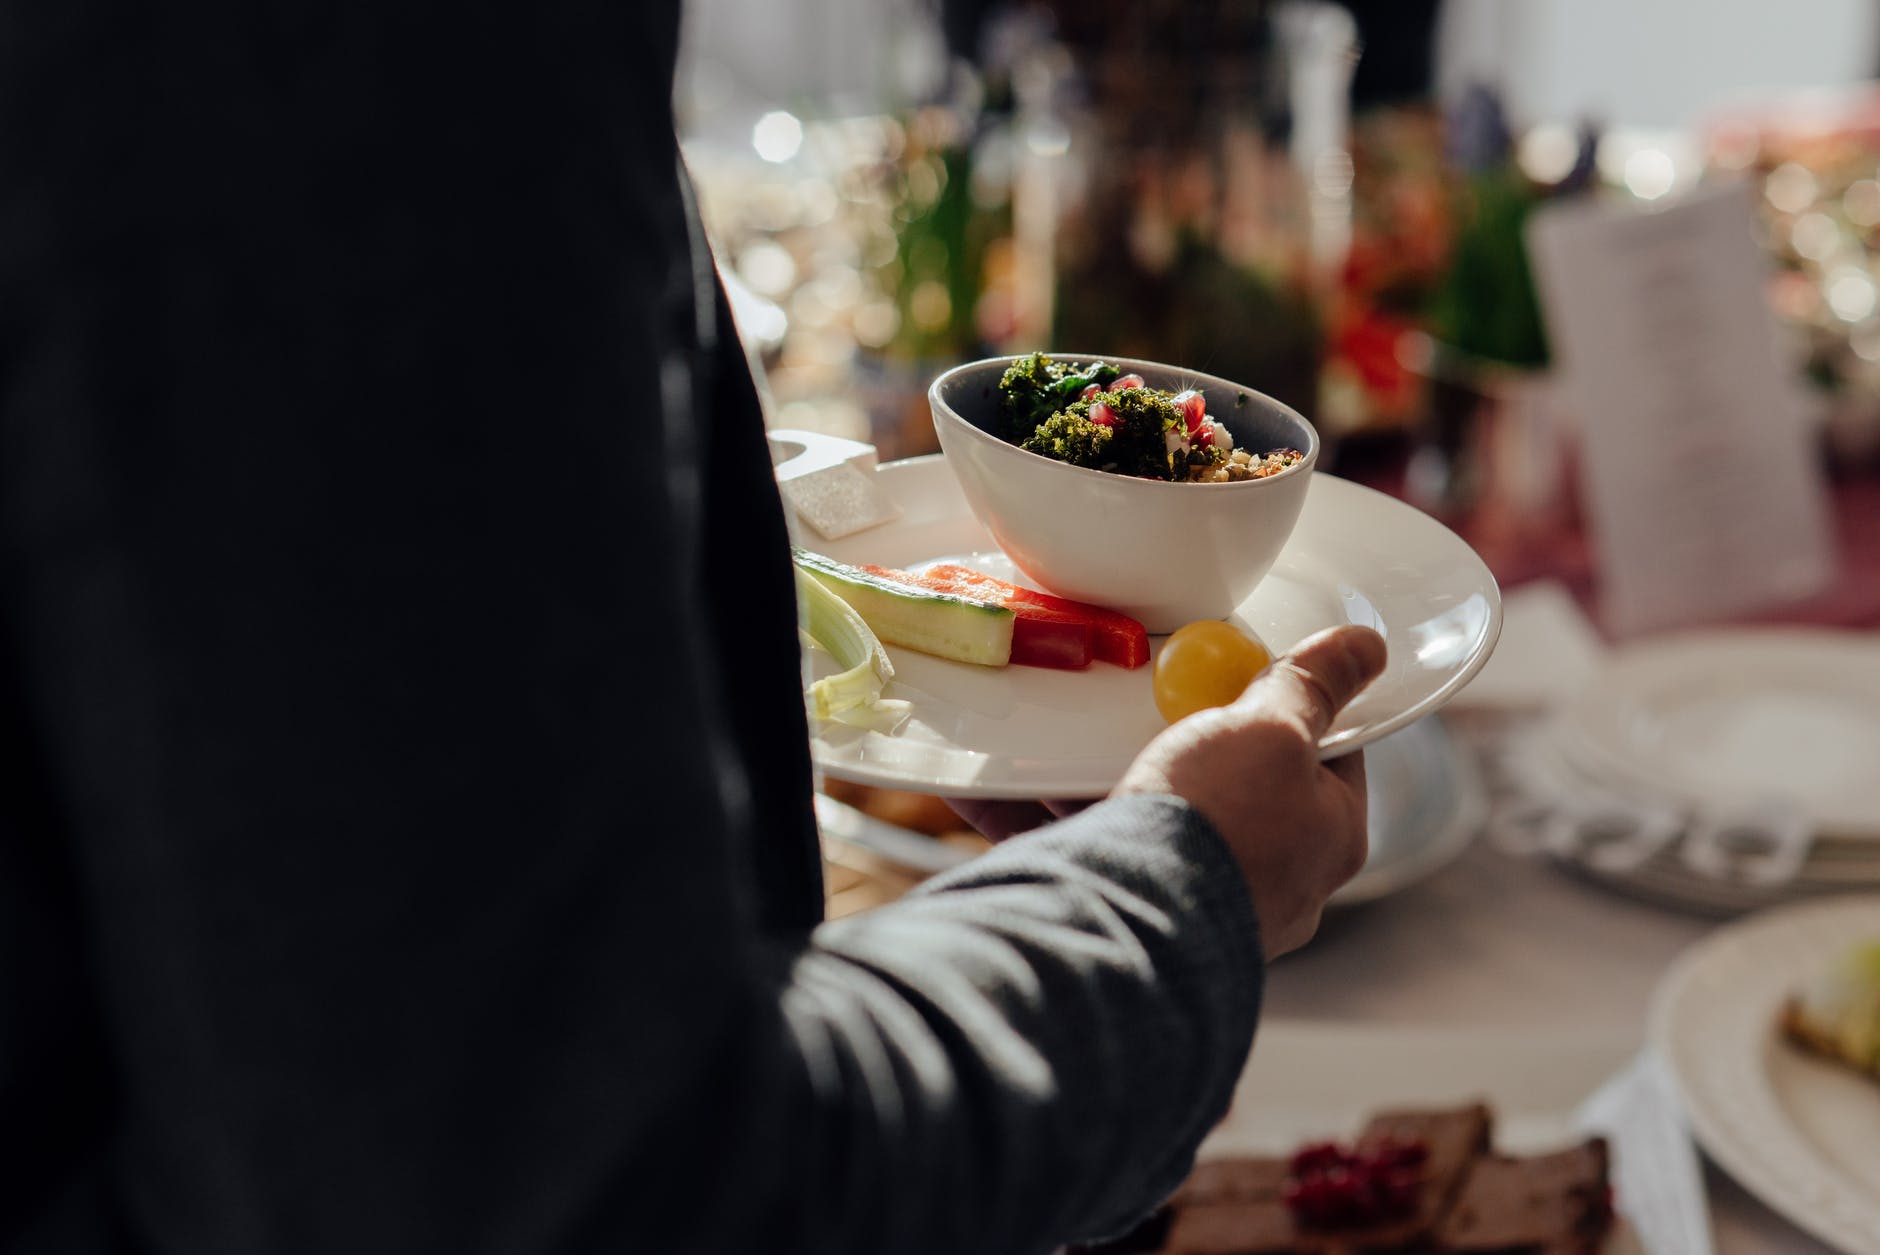 We sat down for dinner and celebrated Mr. Cobb's news. | Source: Pexels